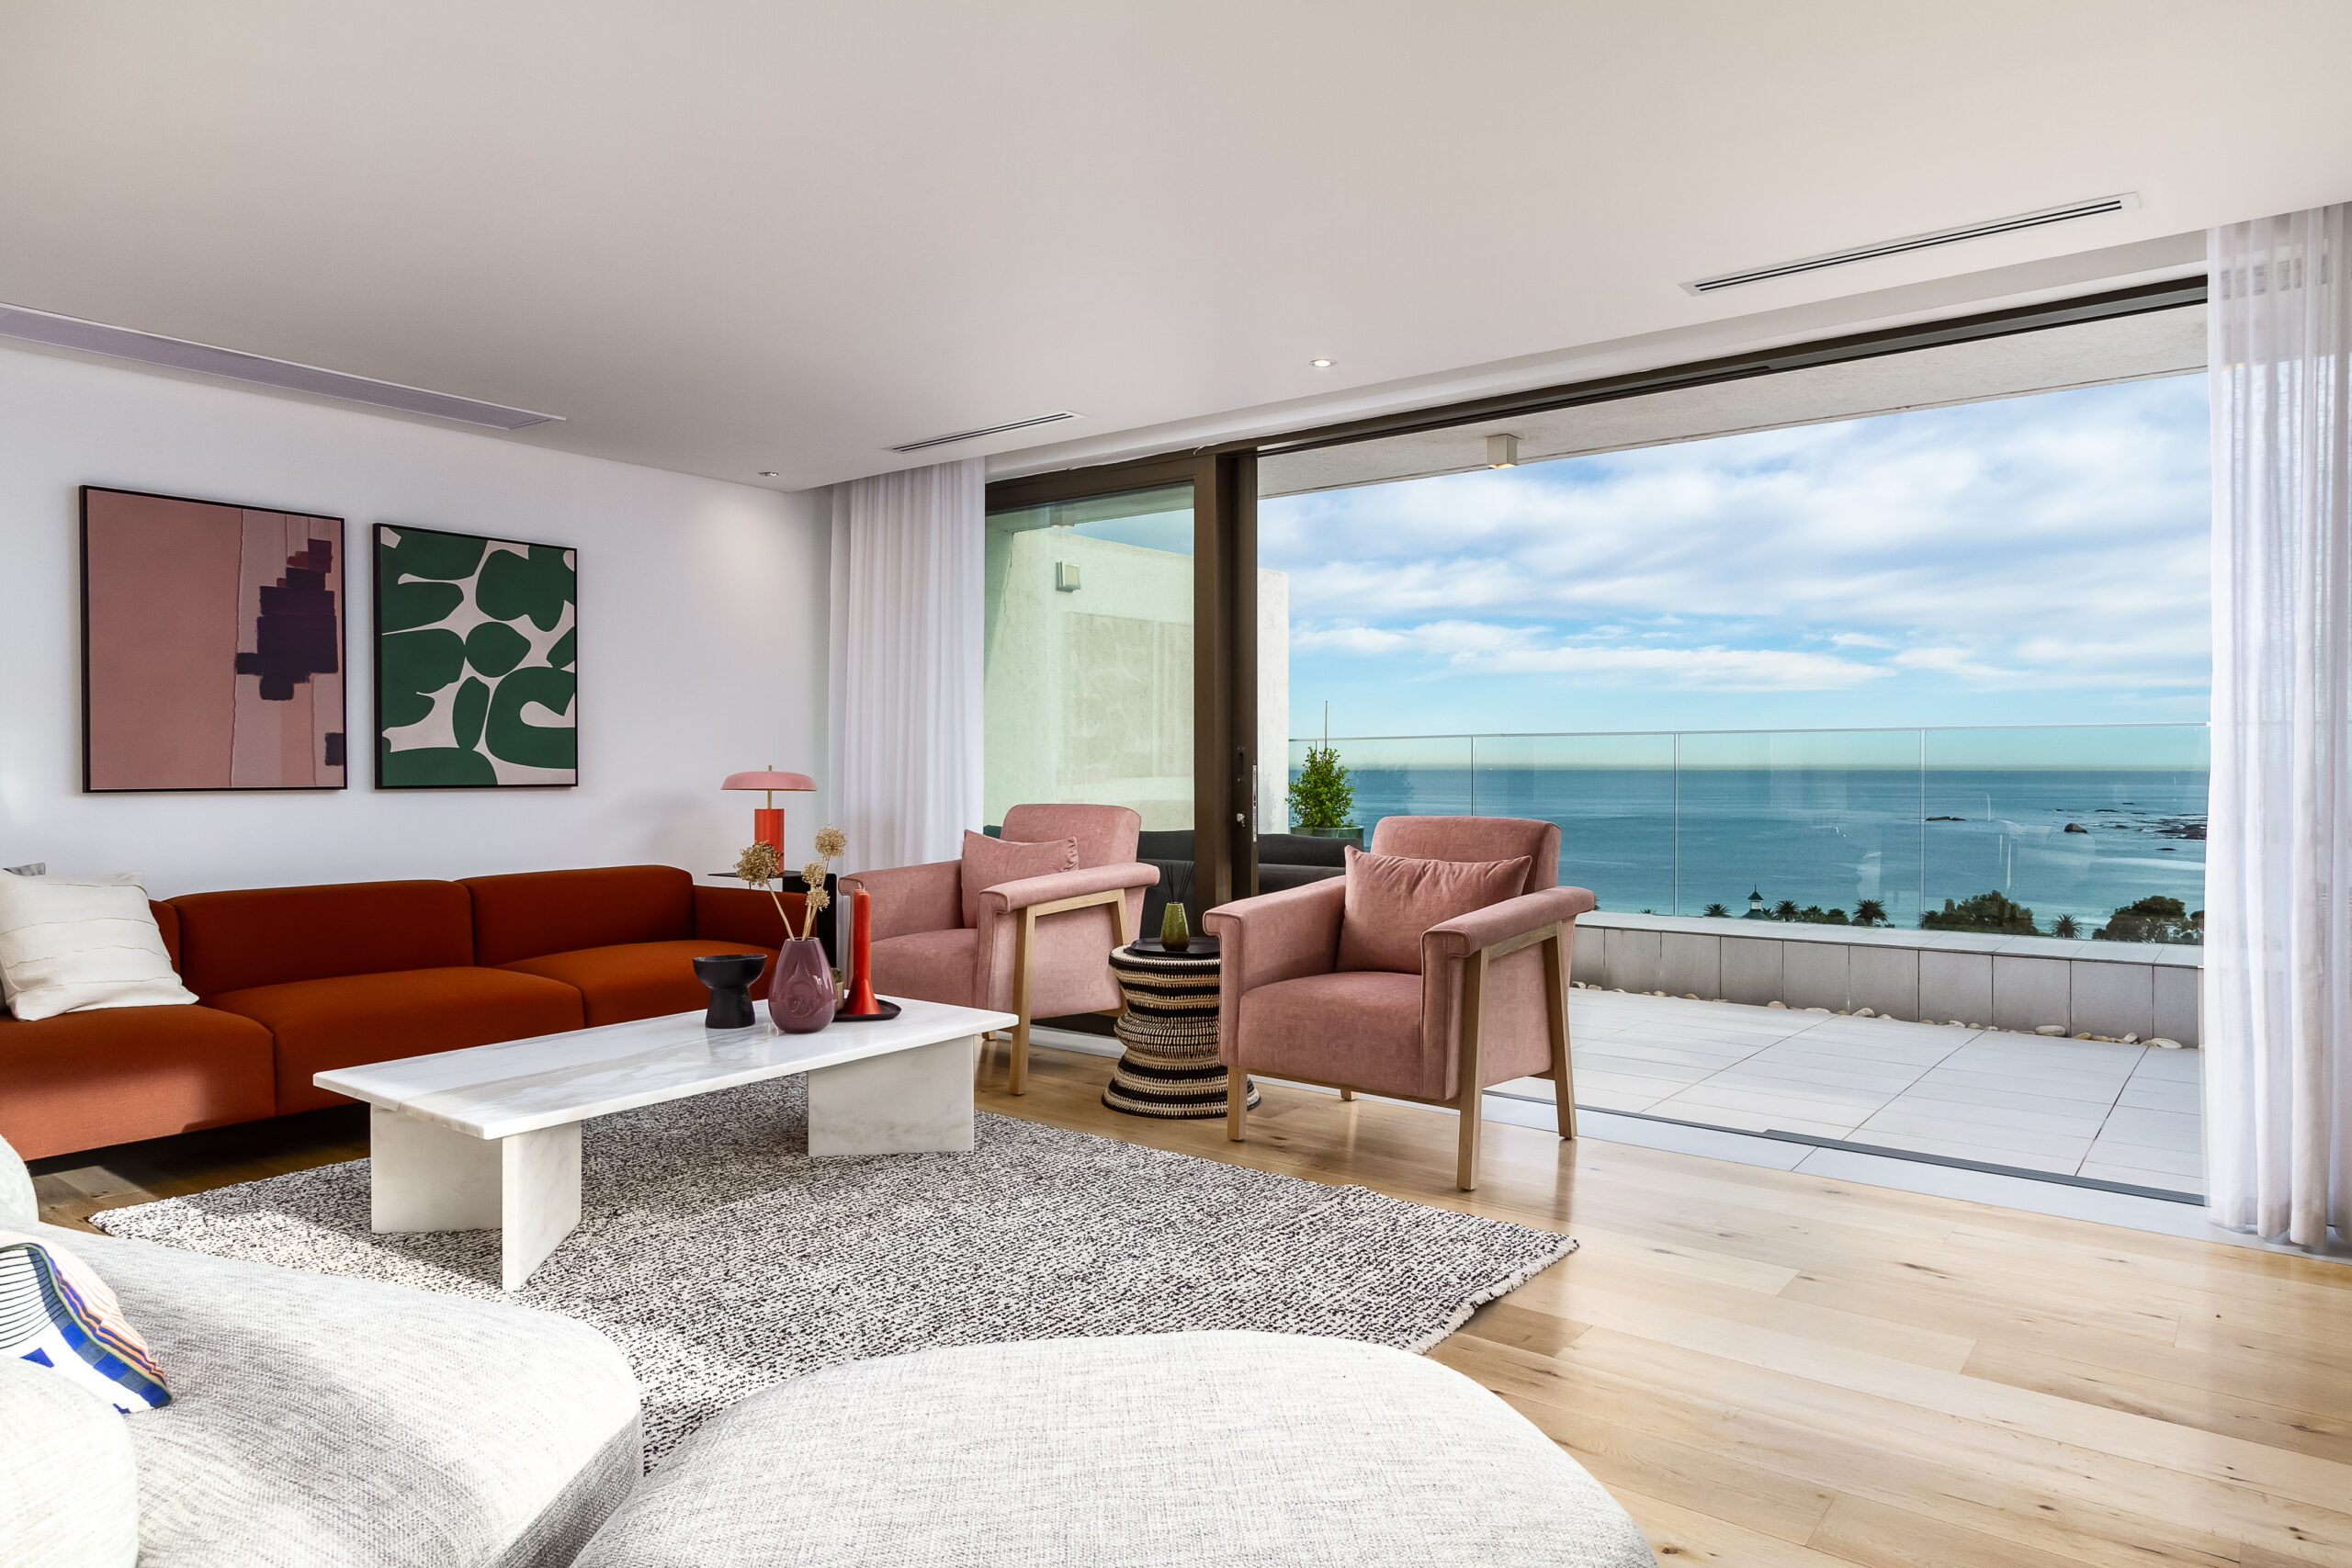 5. Living Room (b) With Sea View